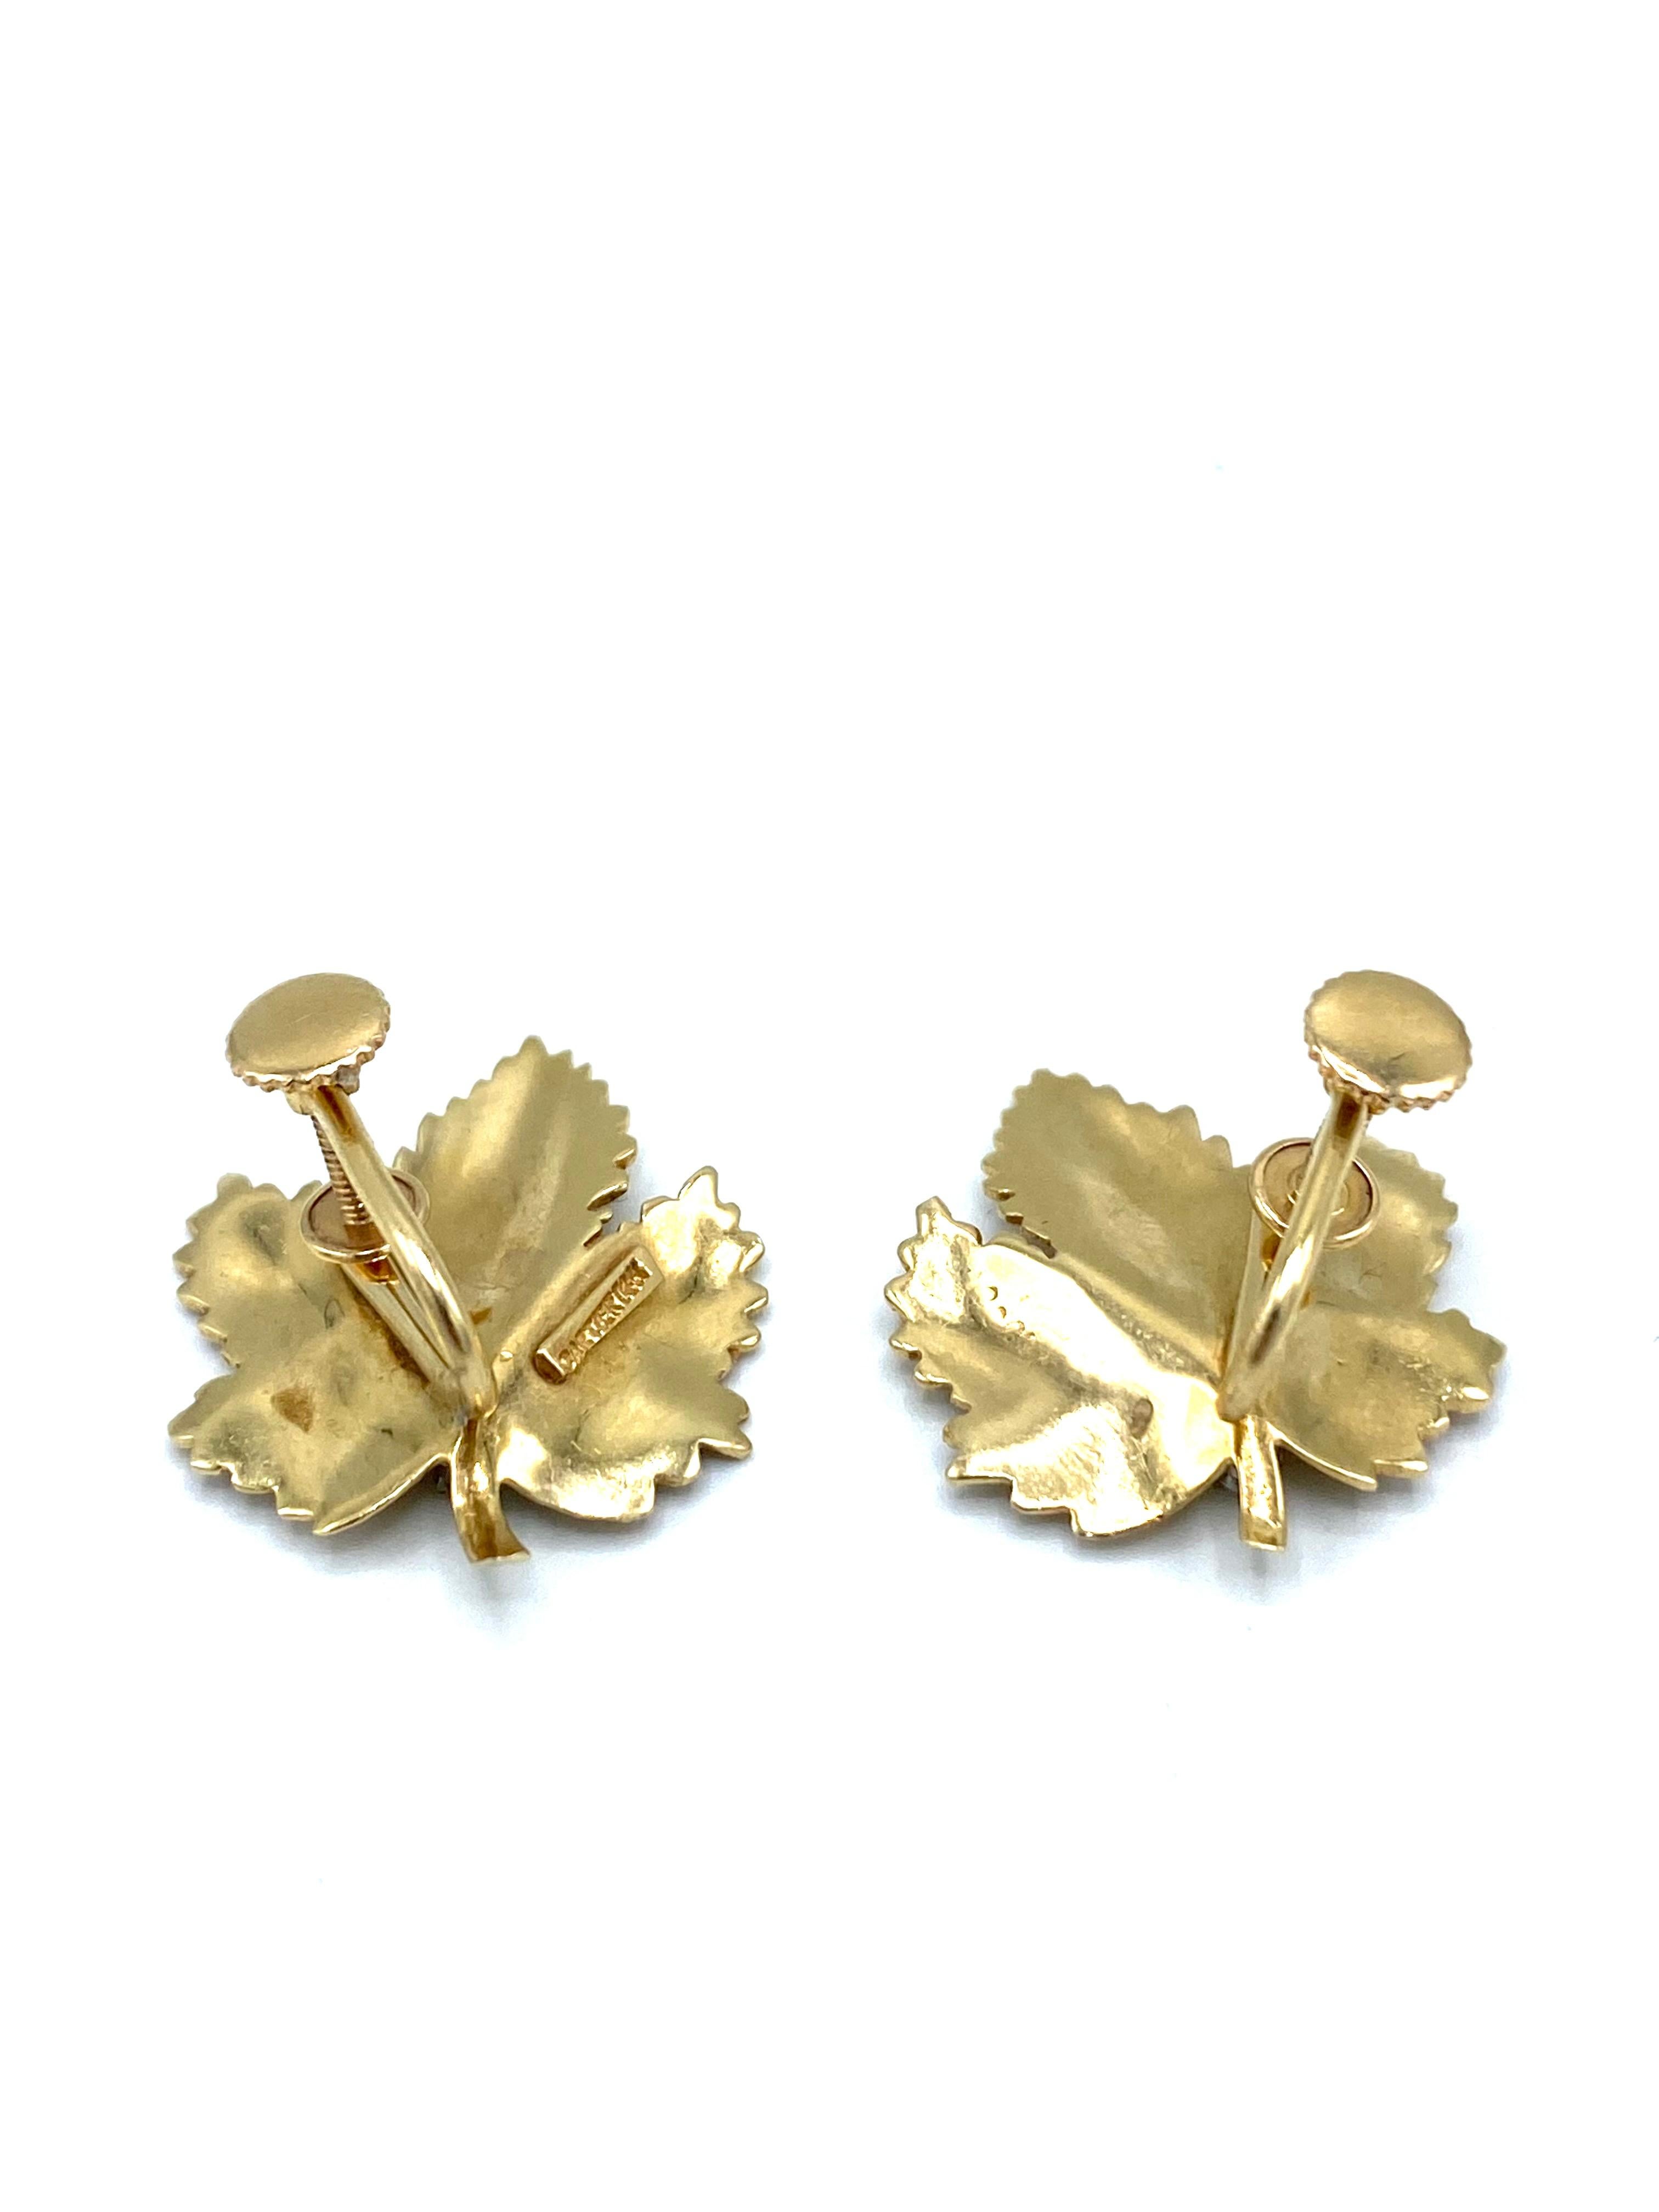 Women's or Men's Vintage CARTIER Yellow Gold and Diamond Maple Leaves Earrings 